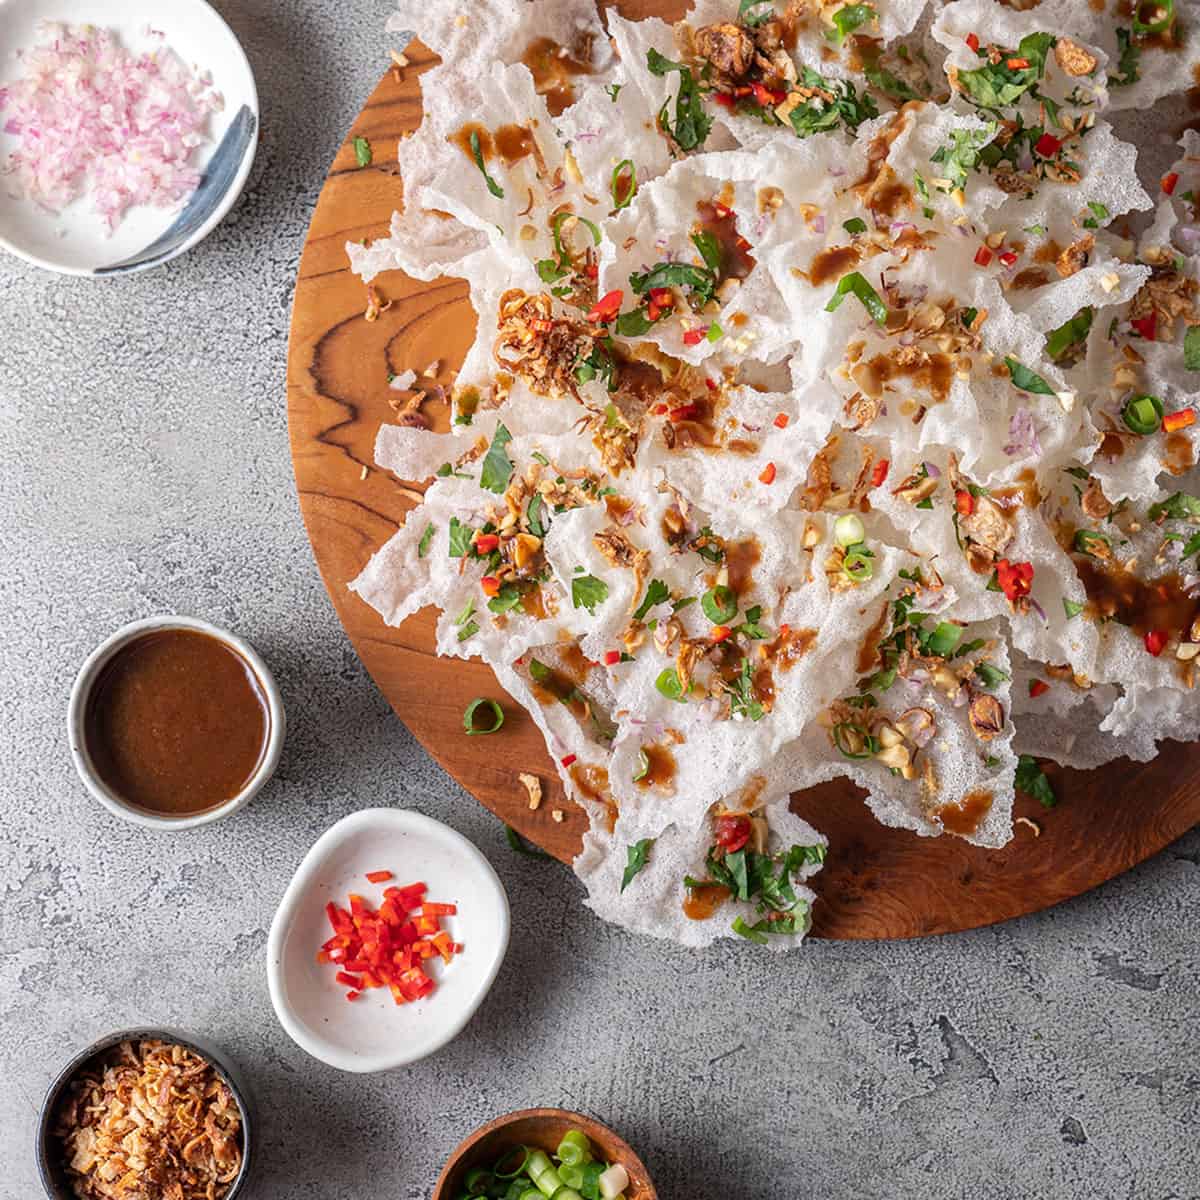 Rice paper crisps with Vietnamese inspired toppings - Quite Good Food